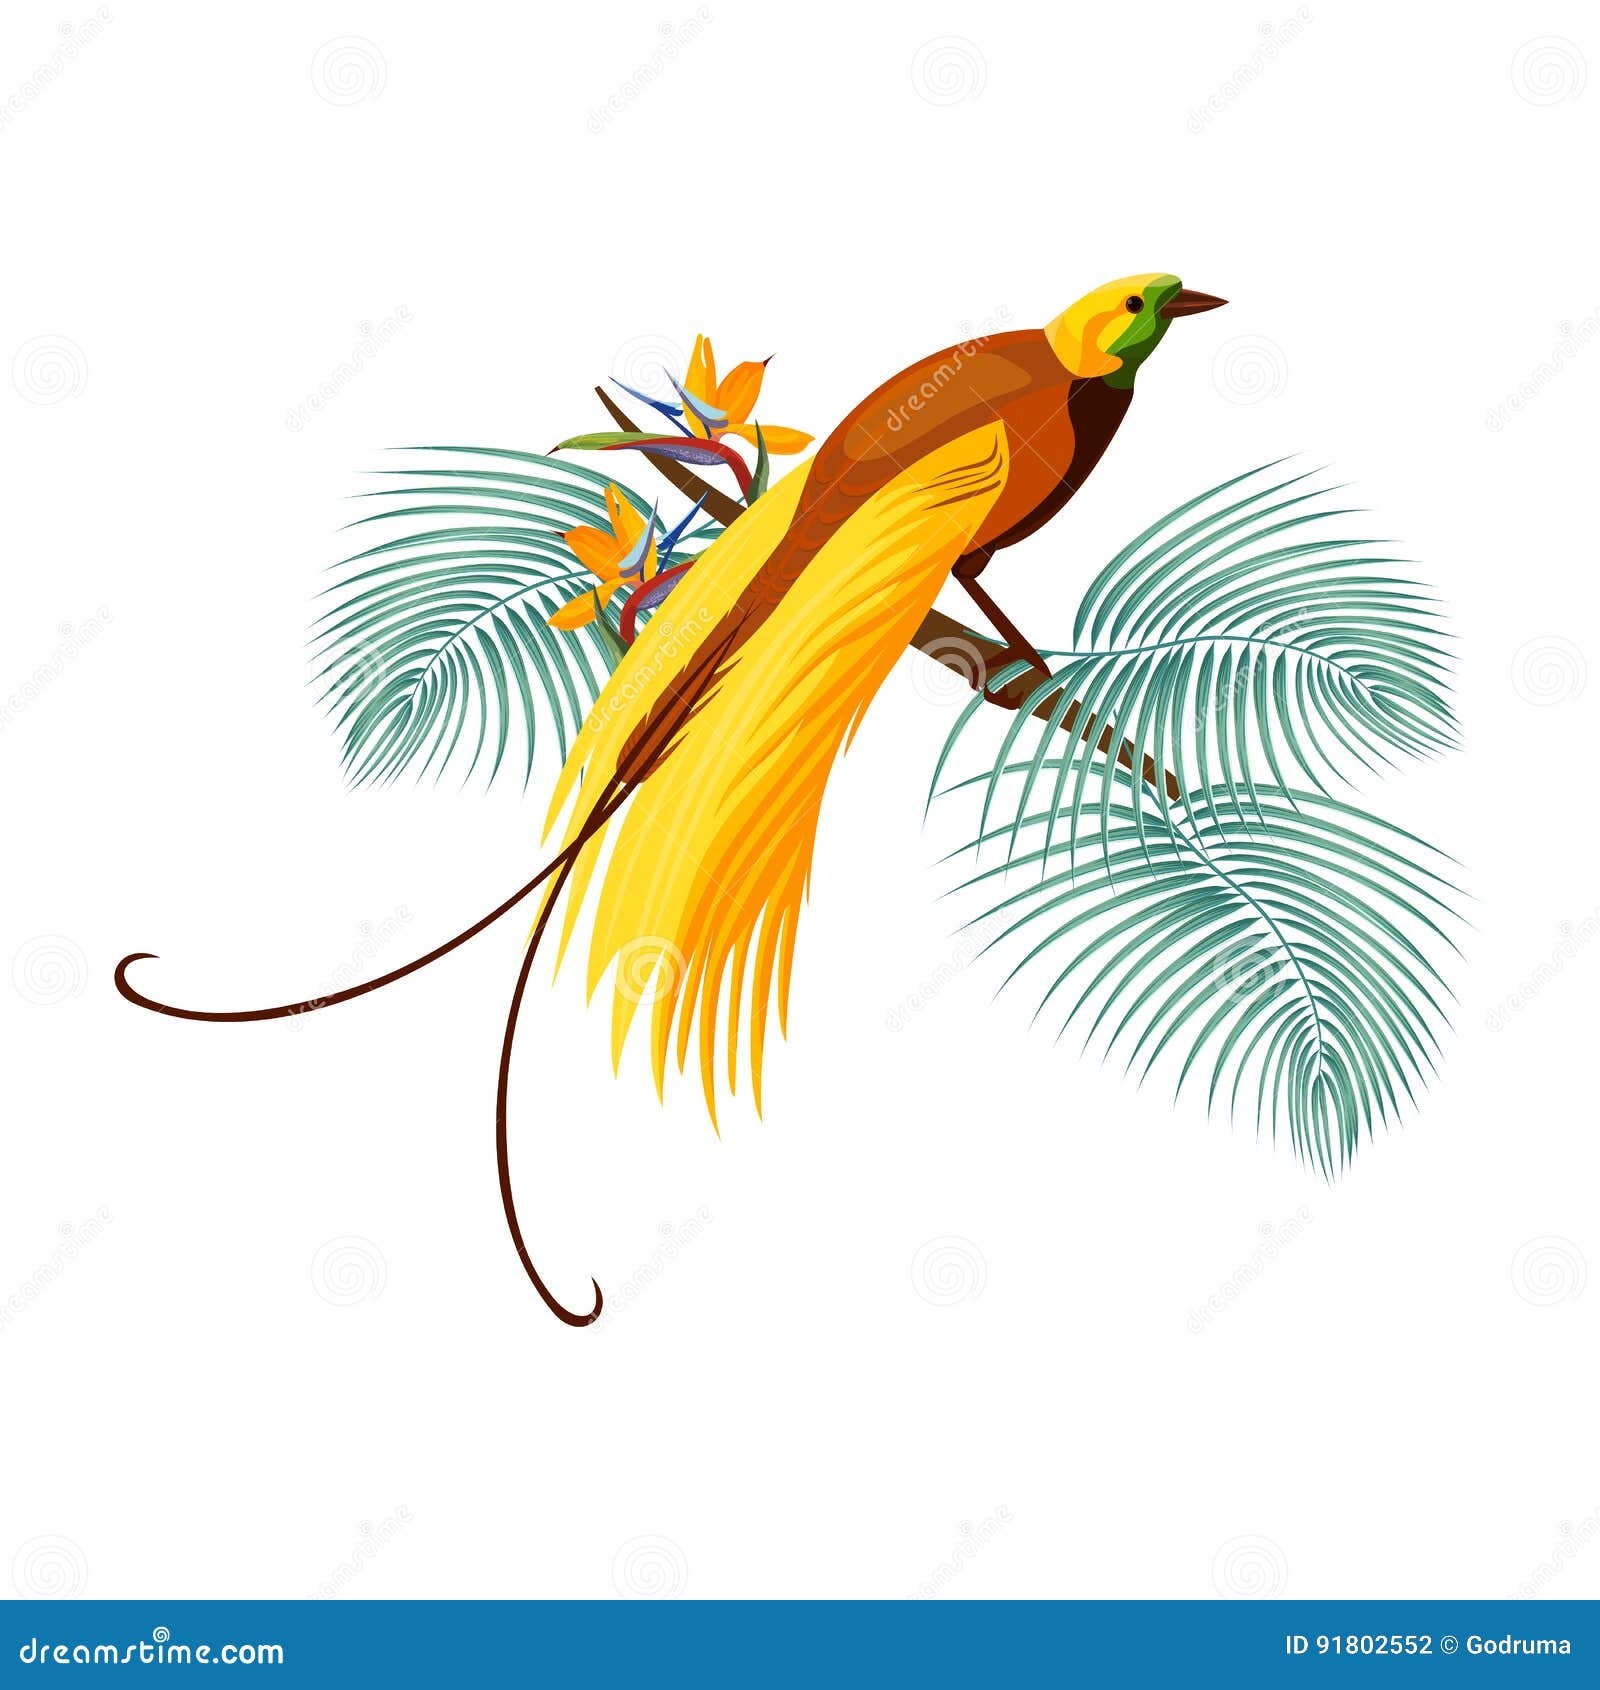 greater bird-of-paradise with yellow tail sitting on branch